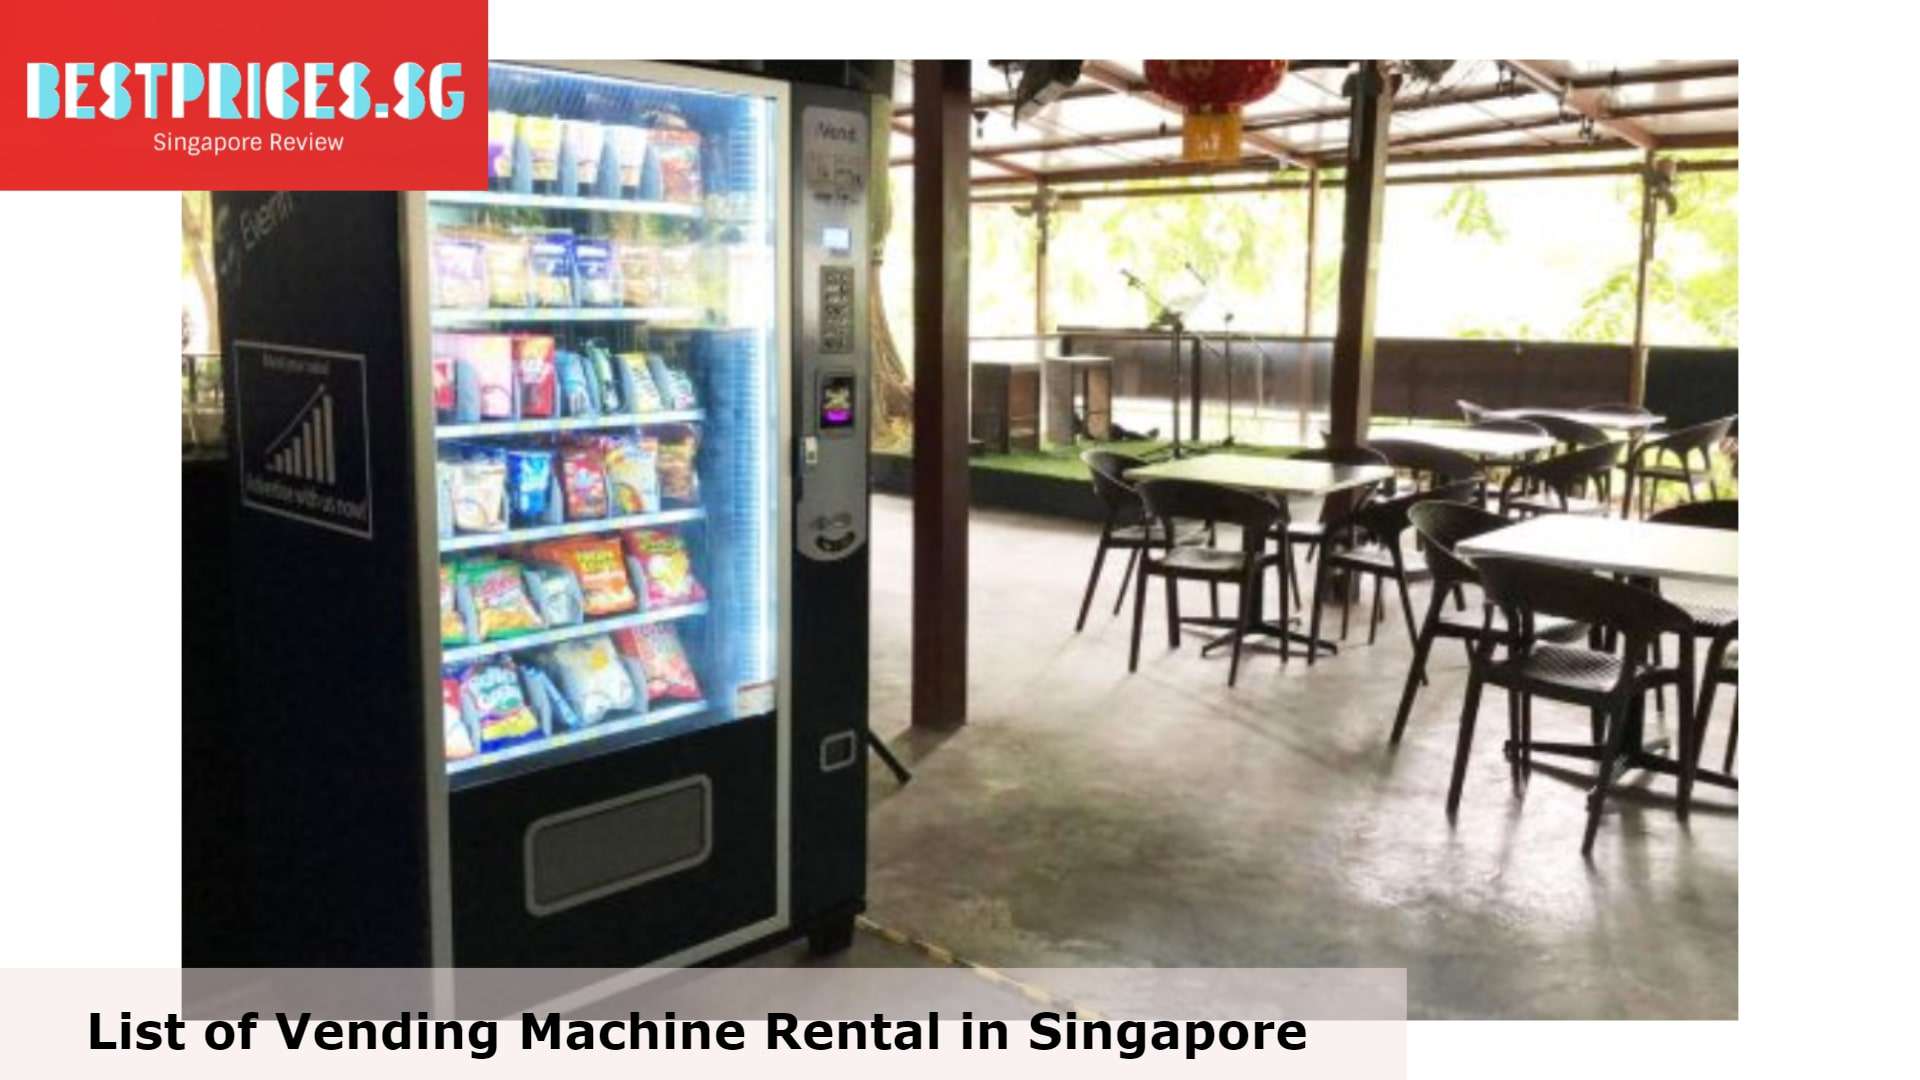 Pixel Party - Vending Machine Rental Singapore, Vending Machine Rental Singapore, Vending Machine business start guide Singapore, Can I just set up a vending machine?, Can I buy a vending machine and put it anywhere?, Vending Machine Suppliers Singapore, Does vending machine make good money?, vending machine singapore location, vending machine singapore rental, Snack vending machine Singapore, hot food vending machine singapore, halal vending machine singapore, Do you need license for vending machine in Singapore?, 